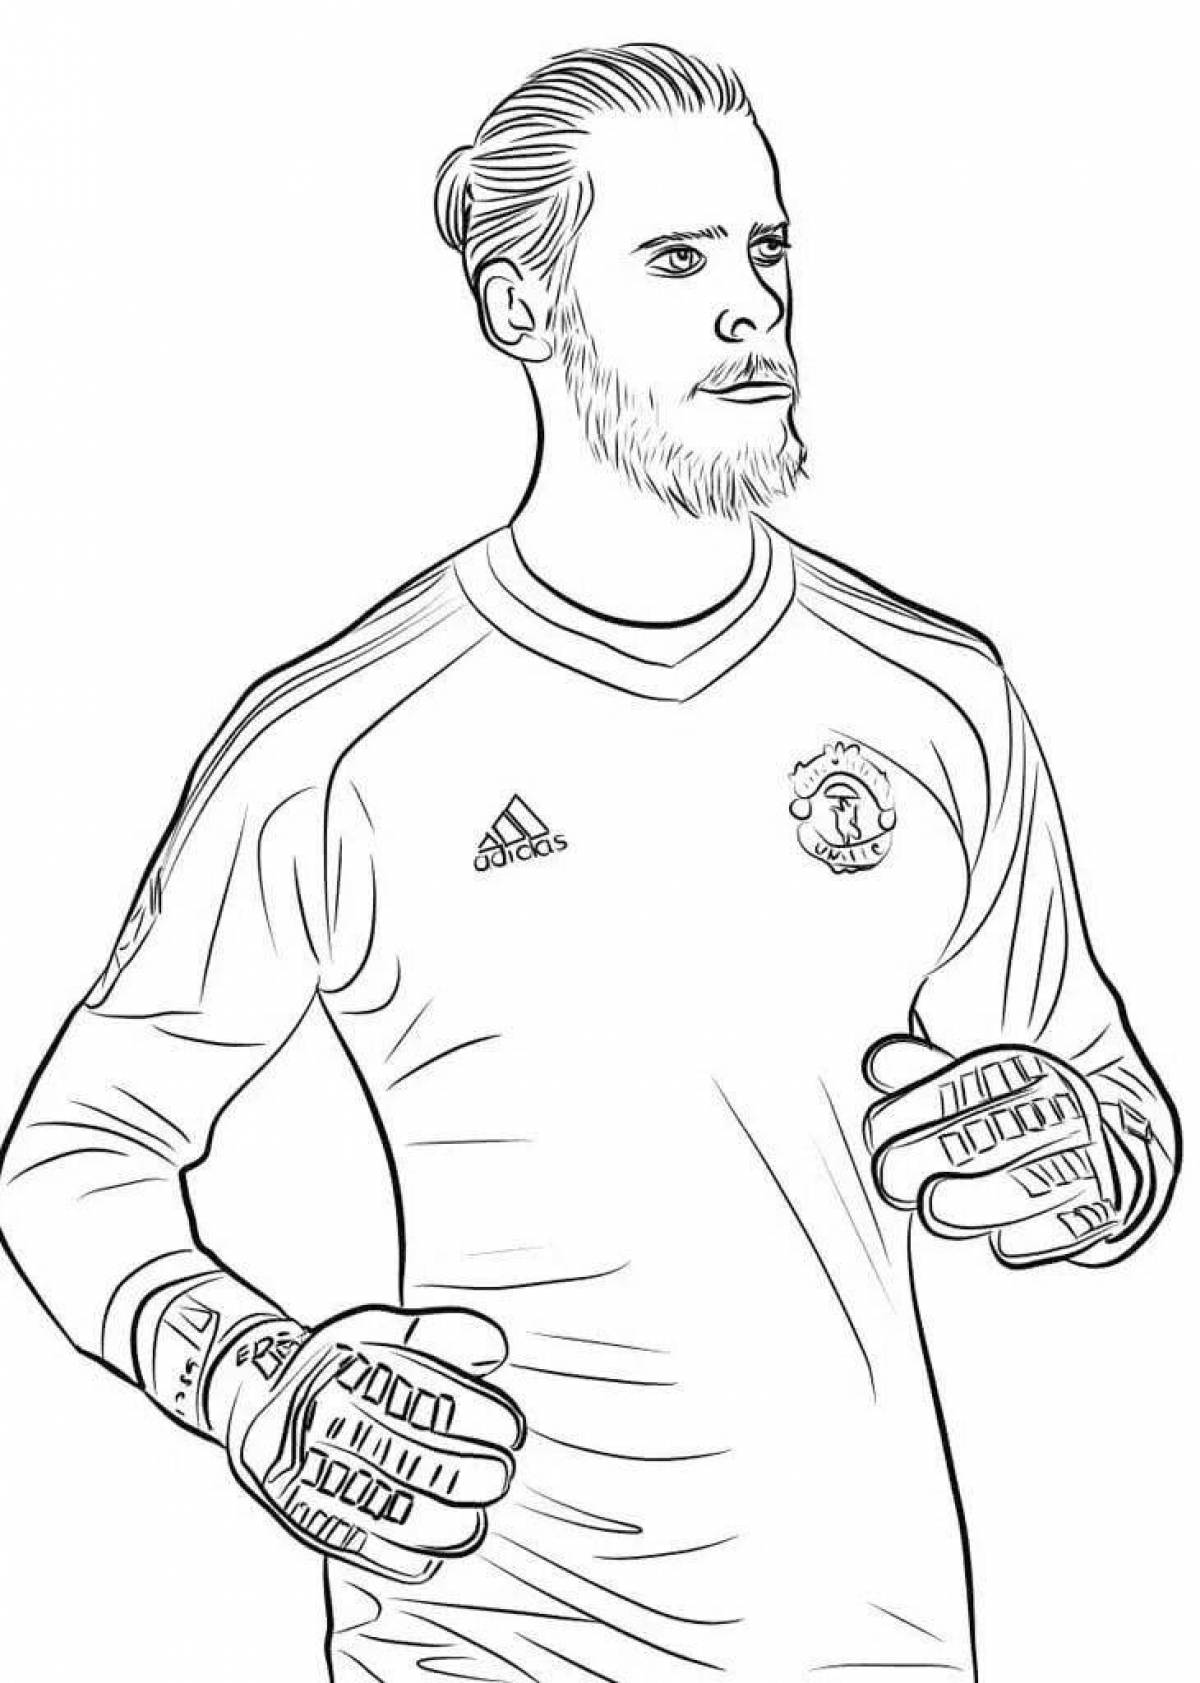 Violent football goalkeeper coloring page